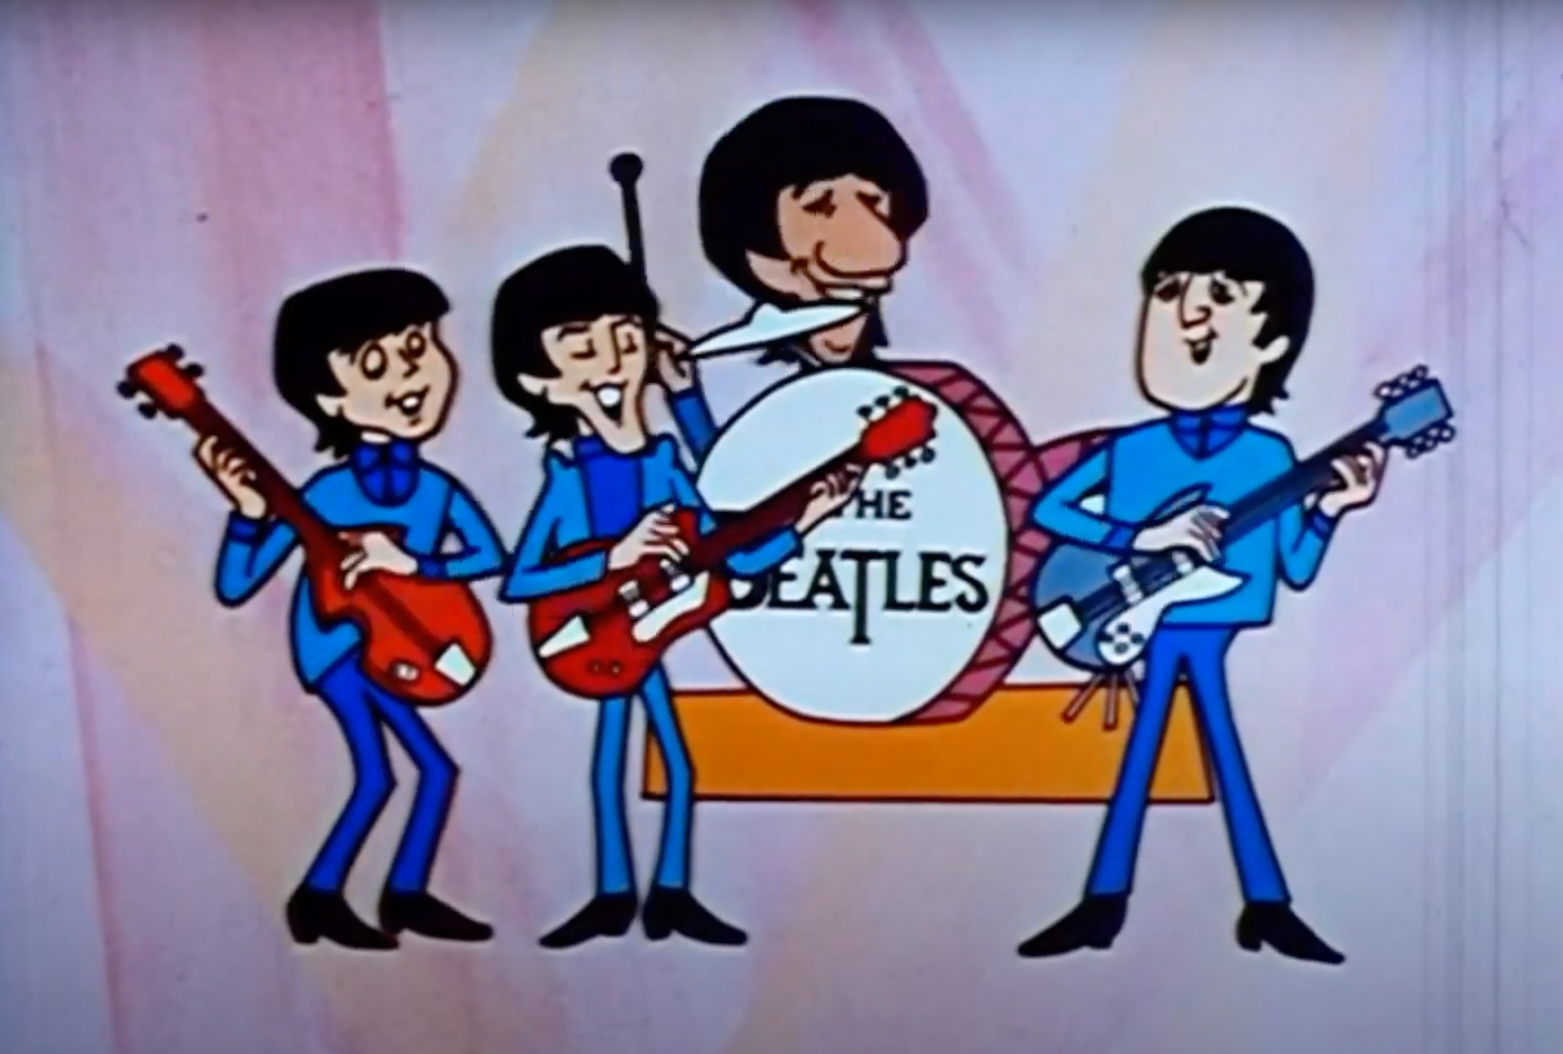 Cartoon image of The Beatles performing with instruments. John Lennon, Paul McCartney, George Harrison, and Ringo Starr are depicted in animated form